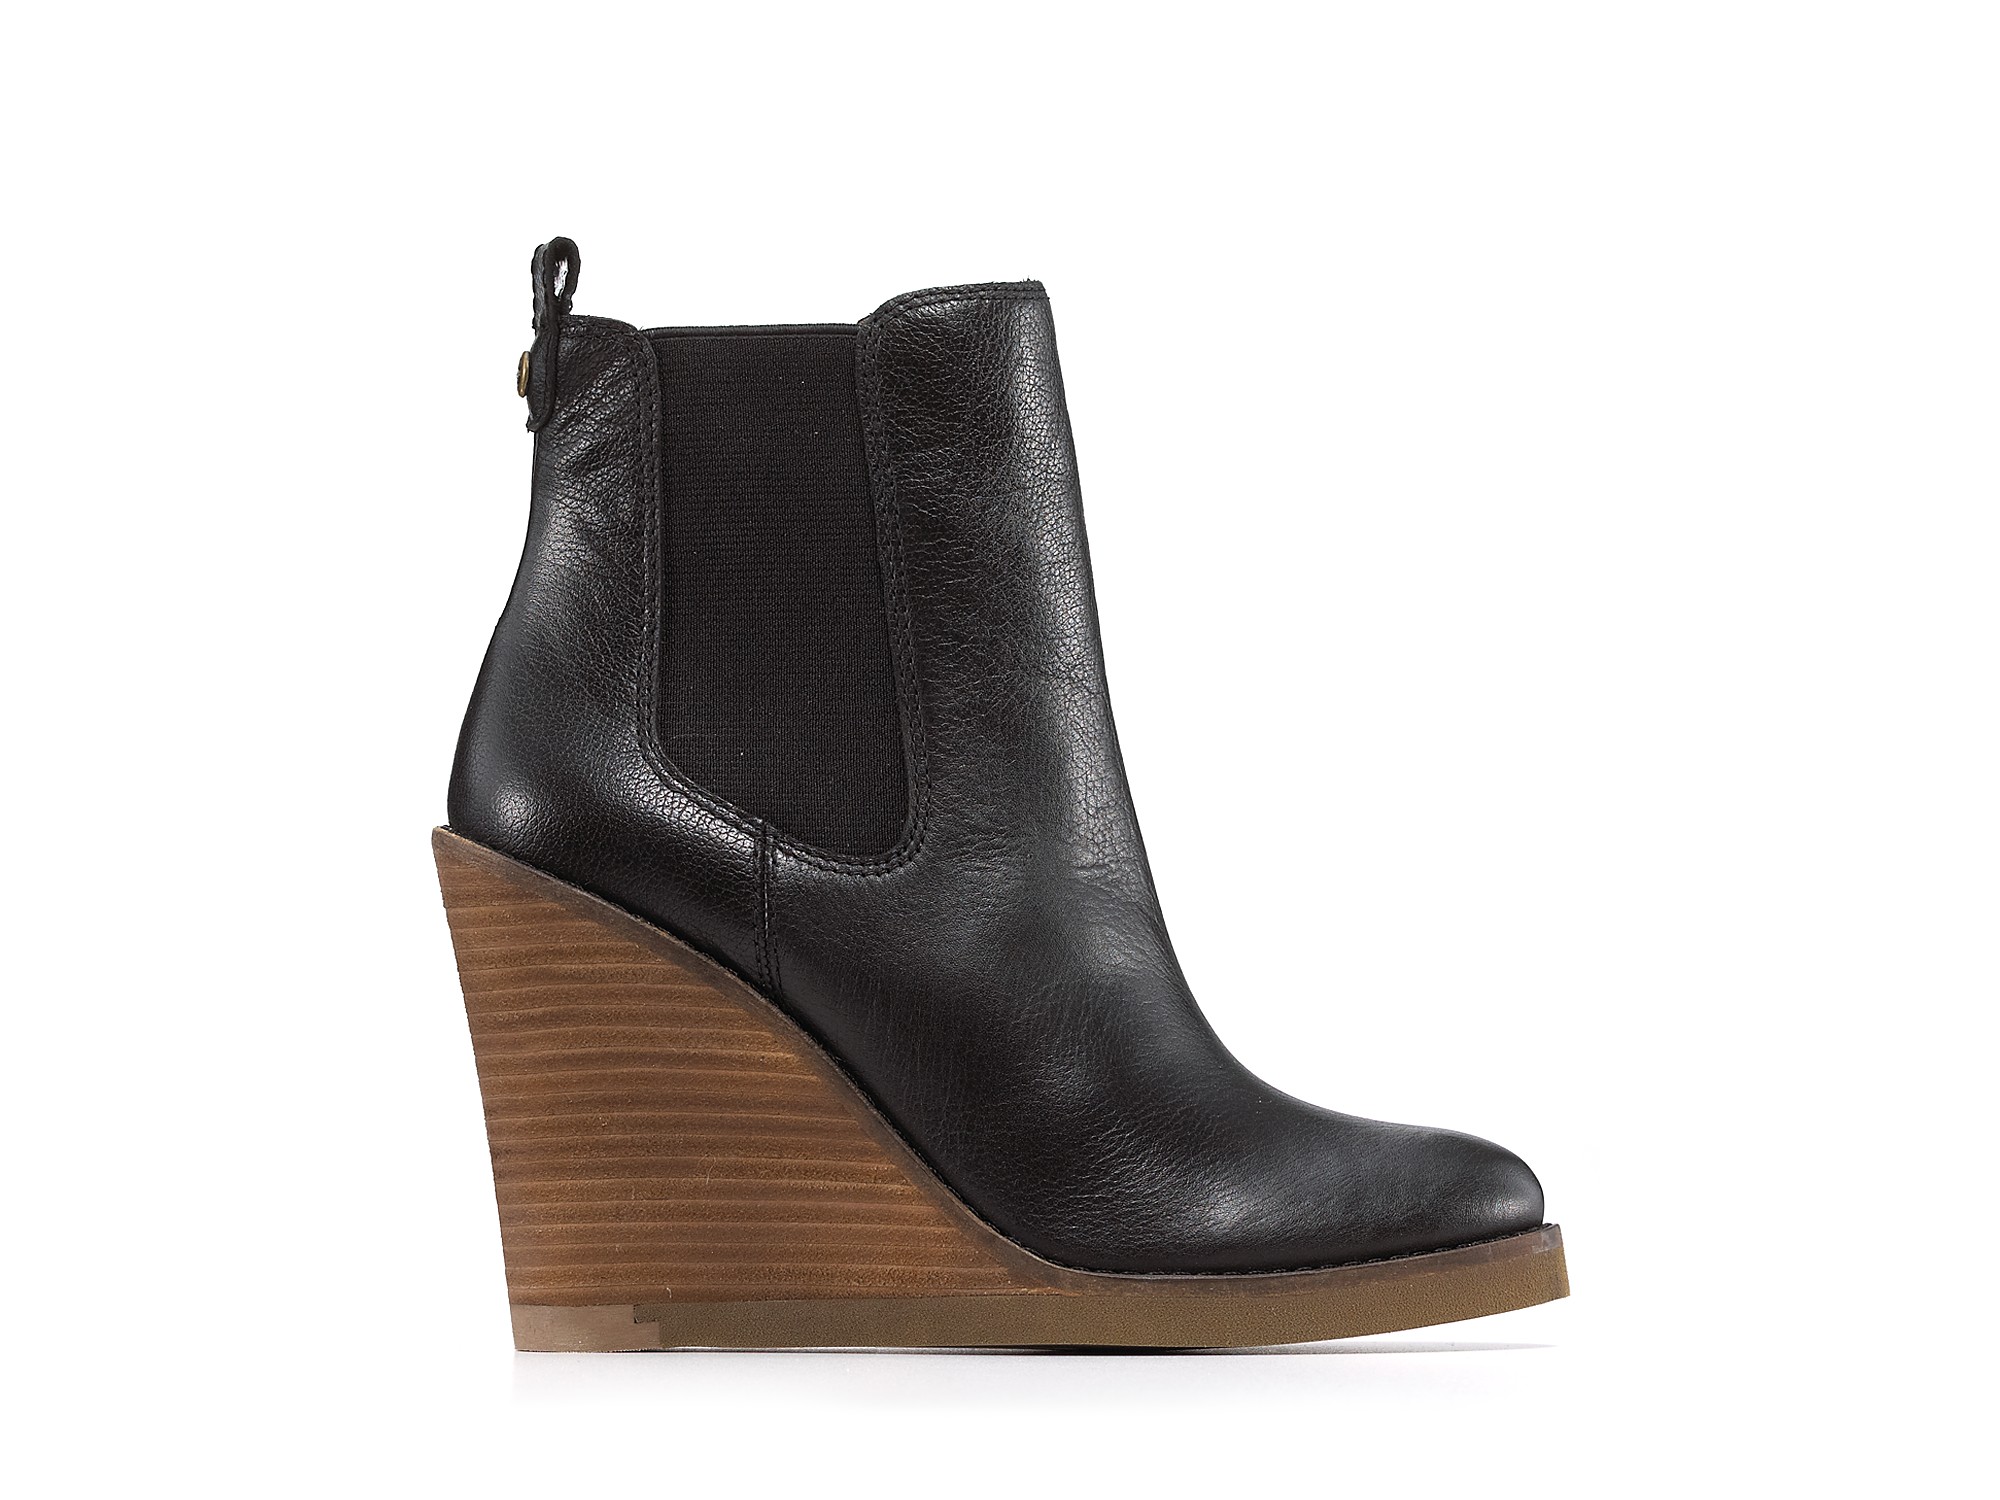 Lucky brand Fedora Wedge Ankle Booties in Brown | Lyst